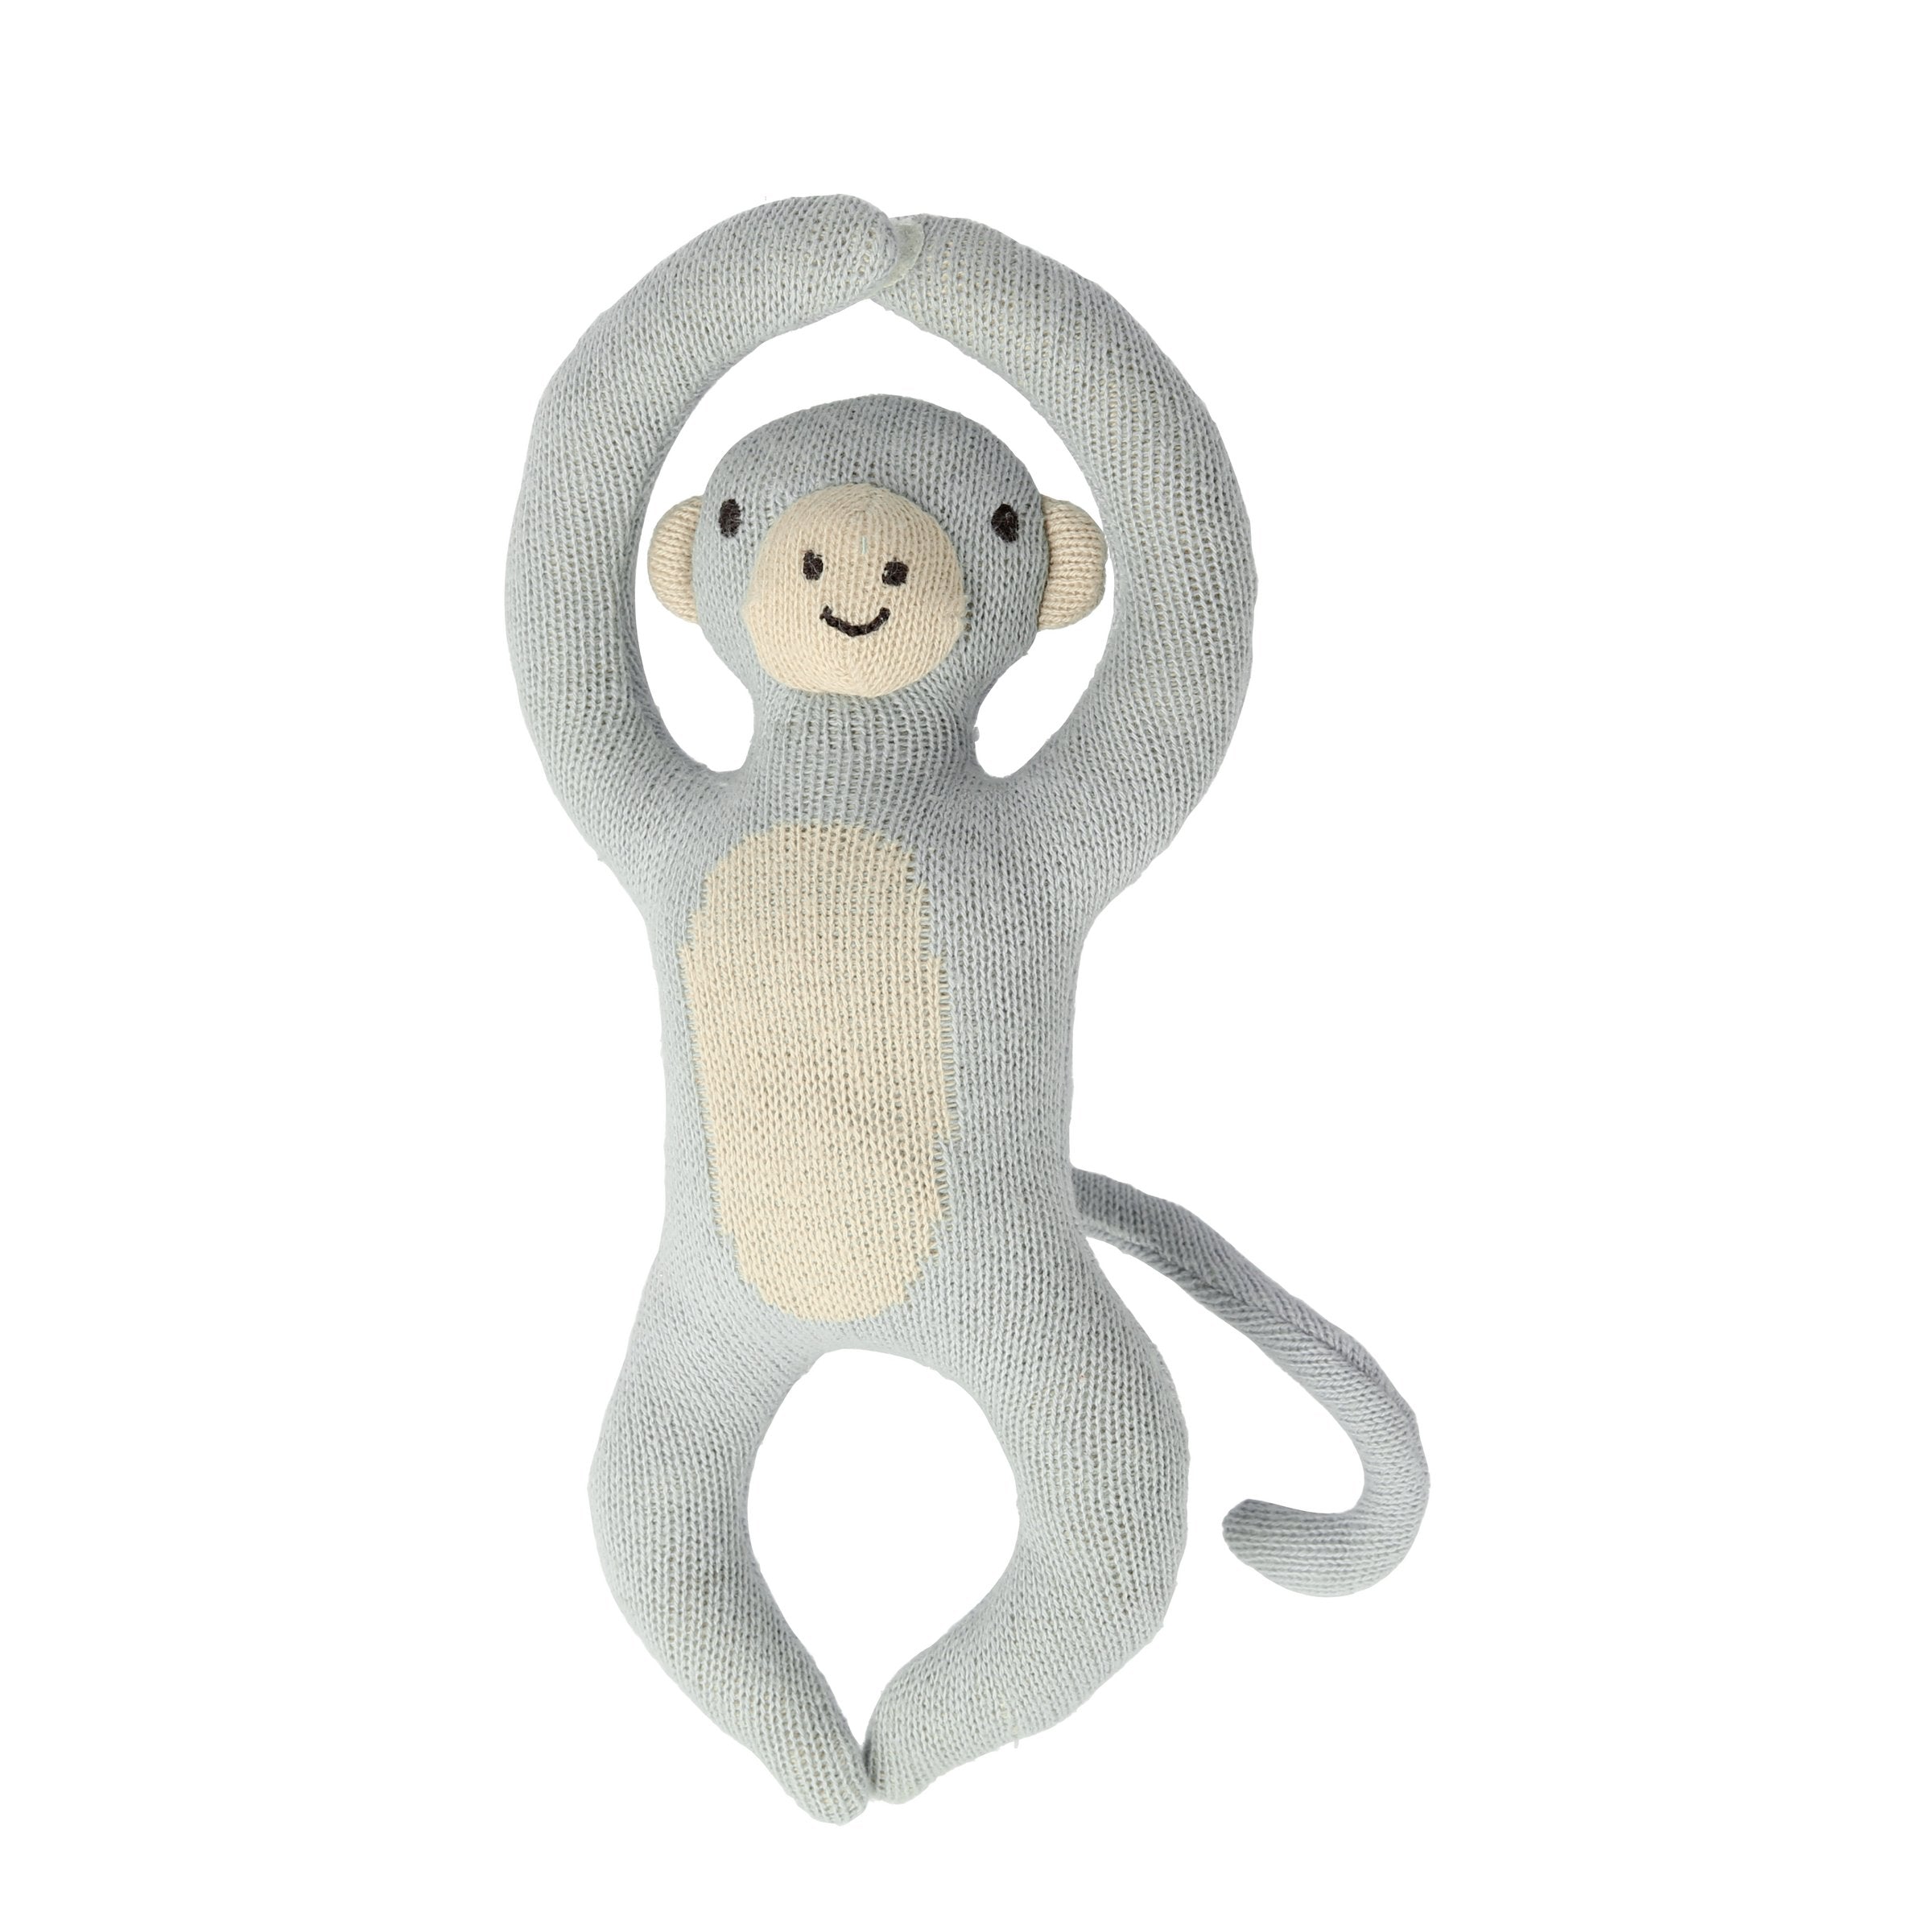 This monkey baby rattle is crafted from organic cotton, perfect as a newborn baby gift.